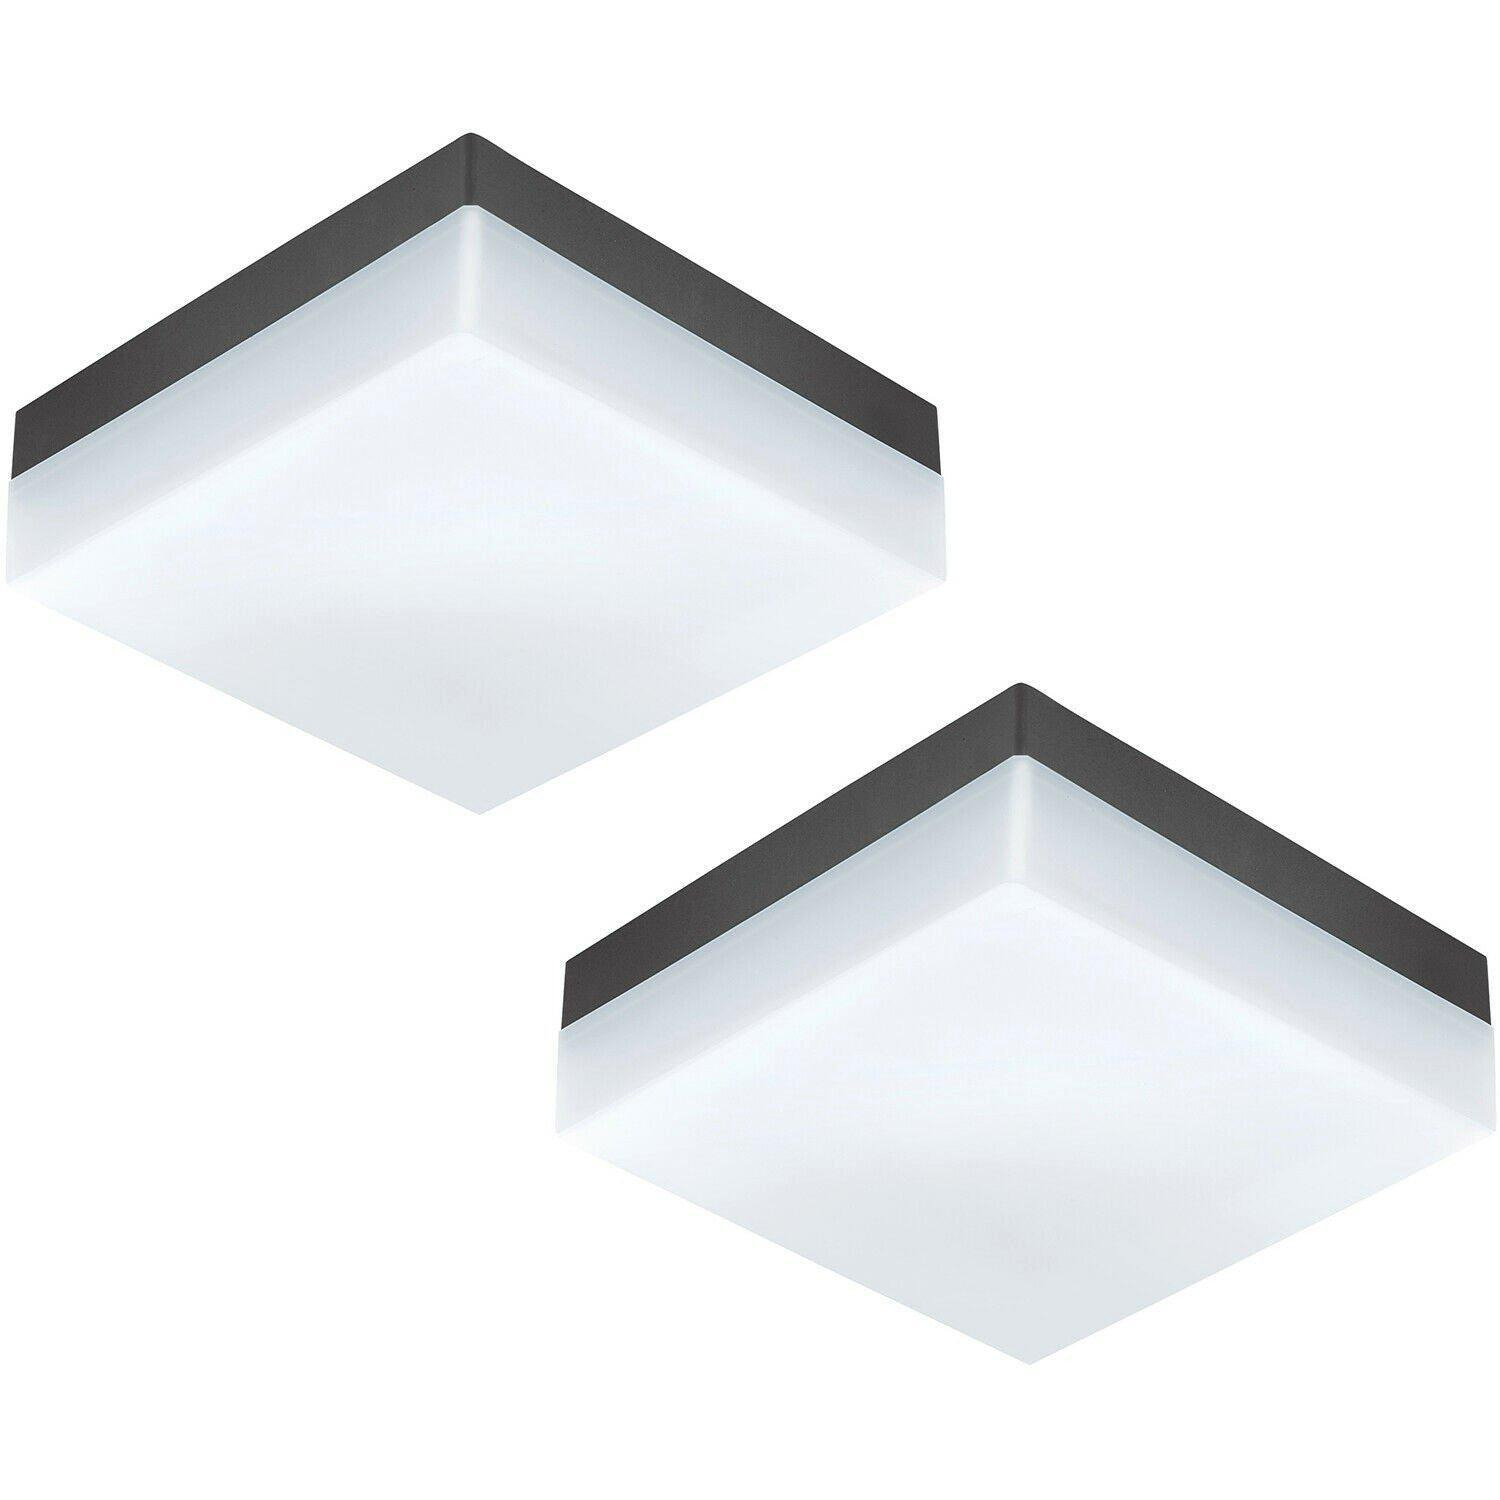 2 PACK IP44 Outdoor Wall Light Anthracite Plastic 8.2W LED Porch Lamp - image 1